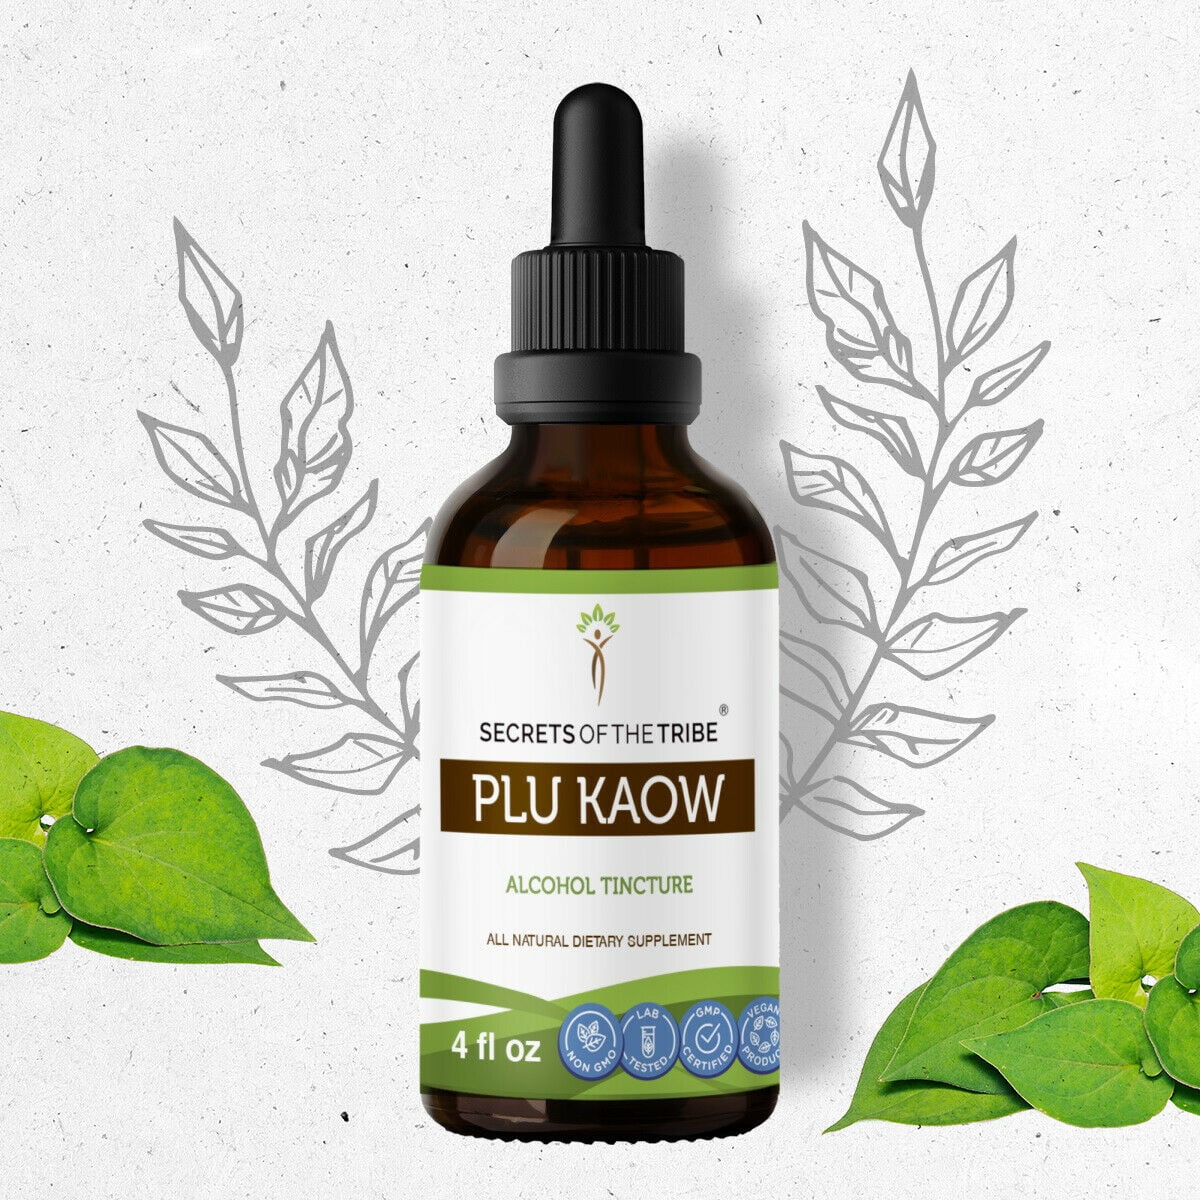 Plu Kaow Tincture Alcohol Extract, Wildcrafted Houttuynia Cordata ...